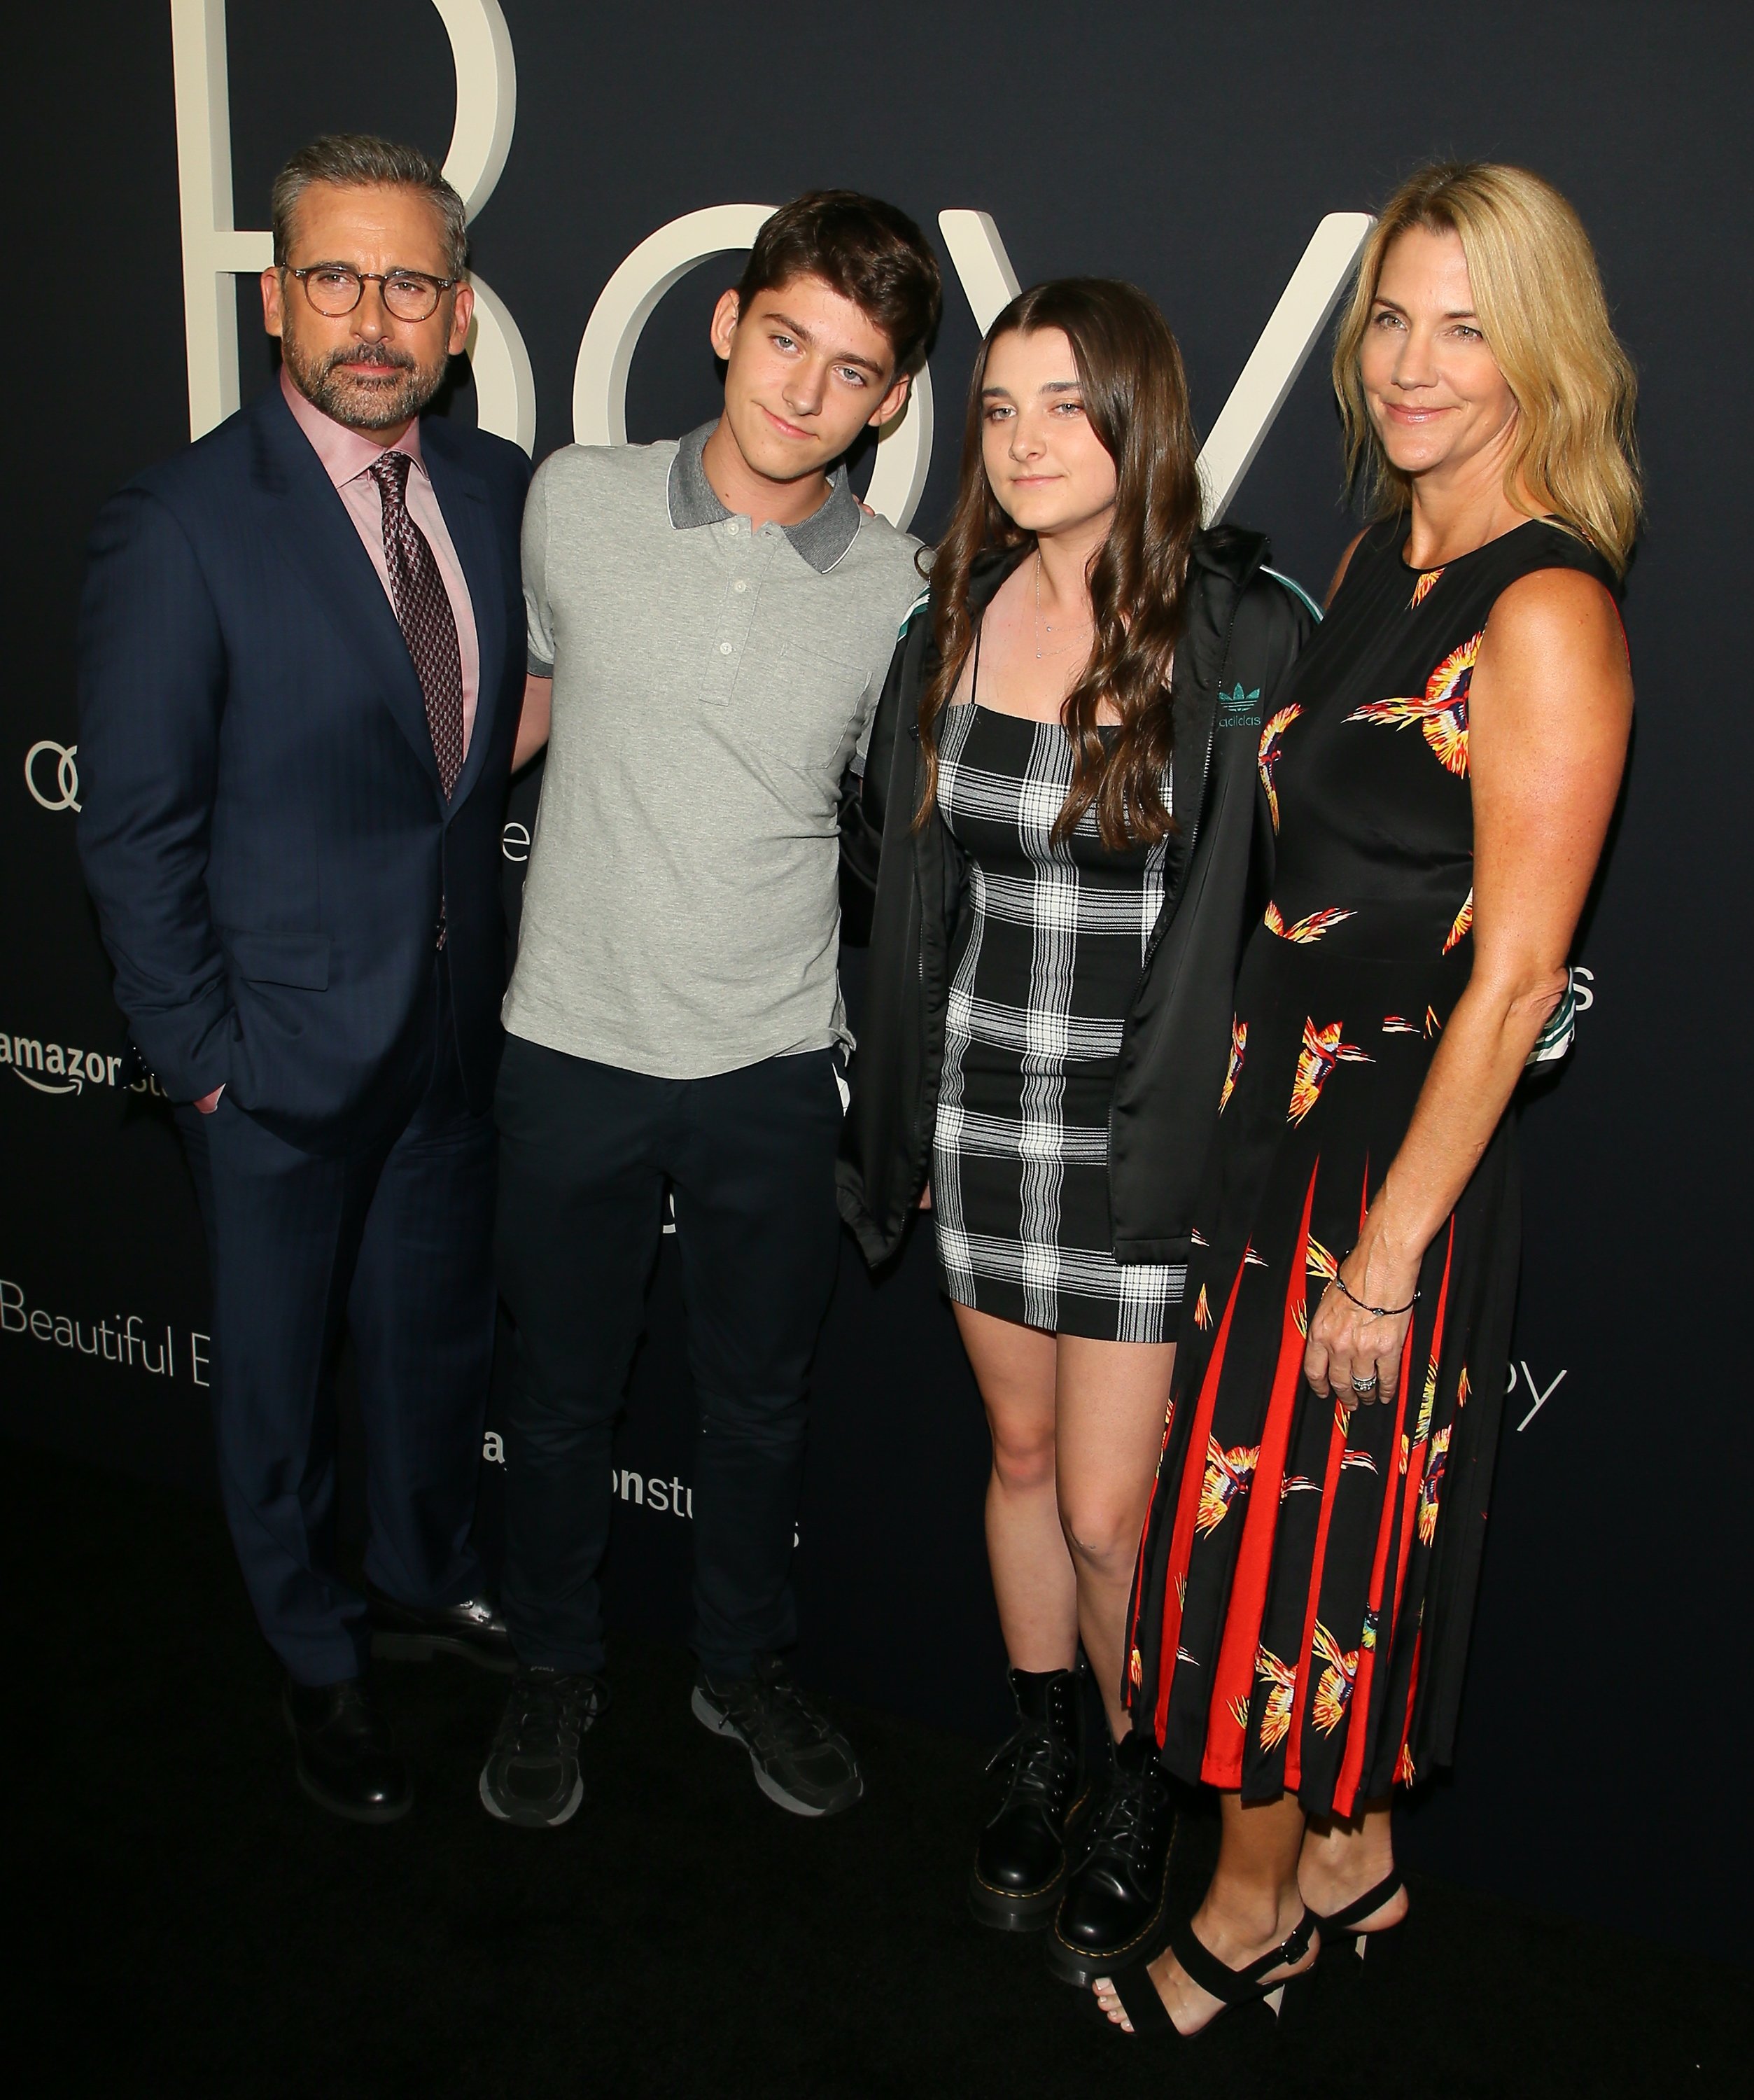 Steve Carell and family at the premiere of "Beautiful Boy" on October 8, 2018 in Beverly Hills | Source: Getty Images